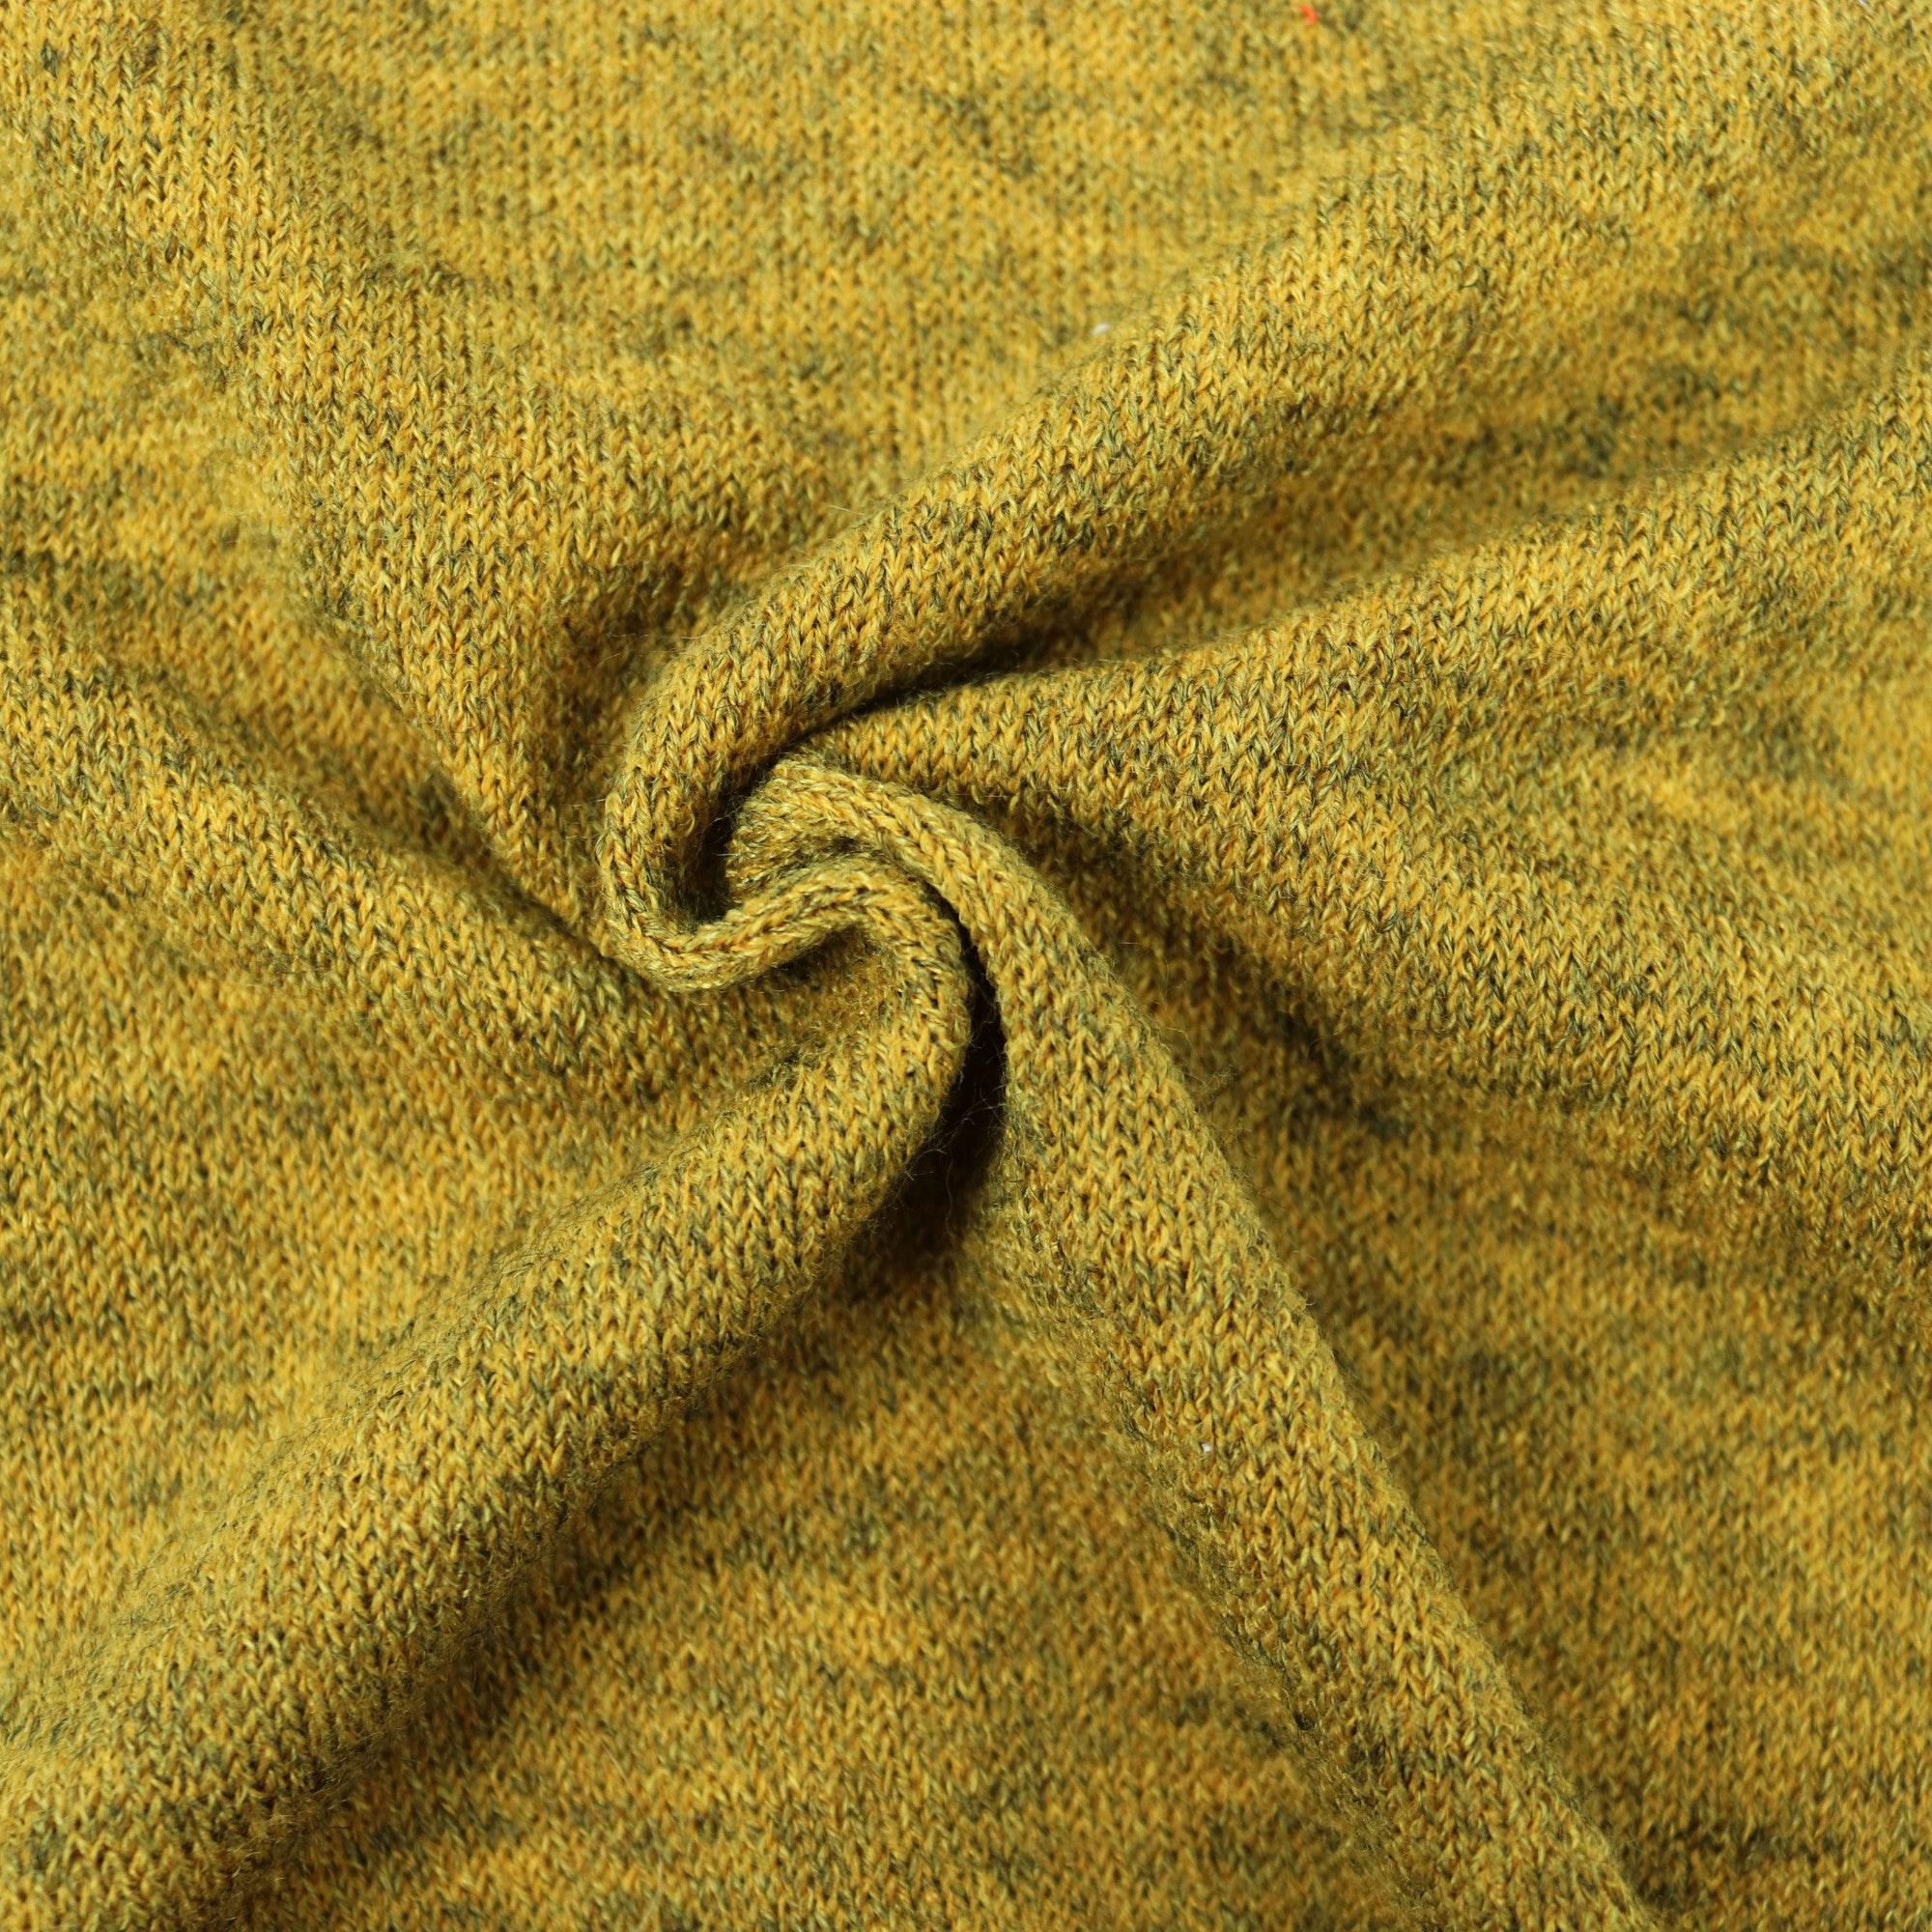 Polyester/Rayon/Spandex Wool-Touch Knit Fabric by the Yard, 58-60 Wid –  Piece Fabric